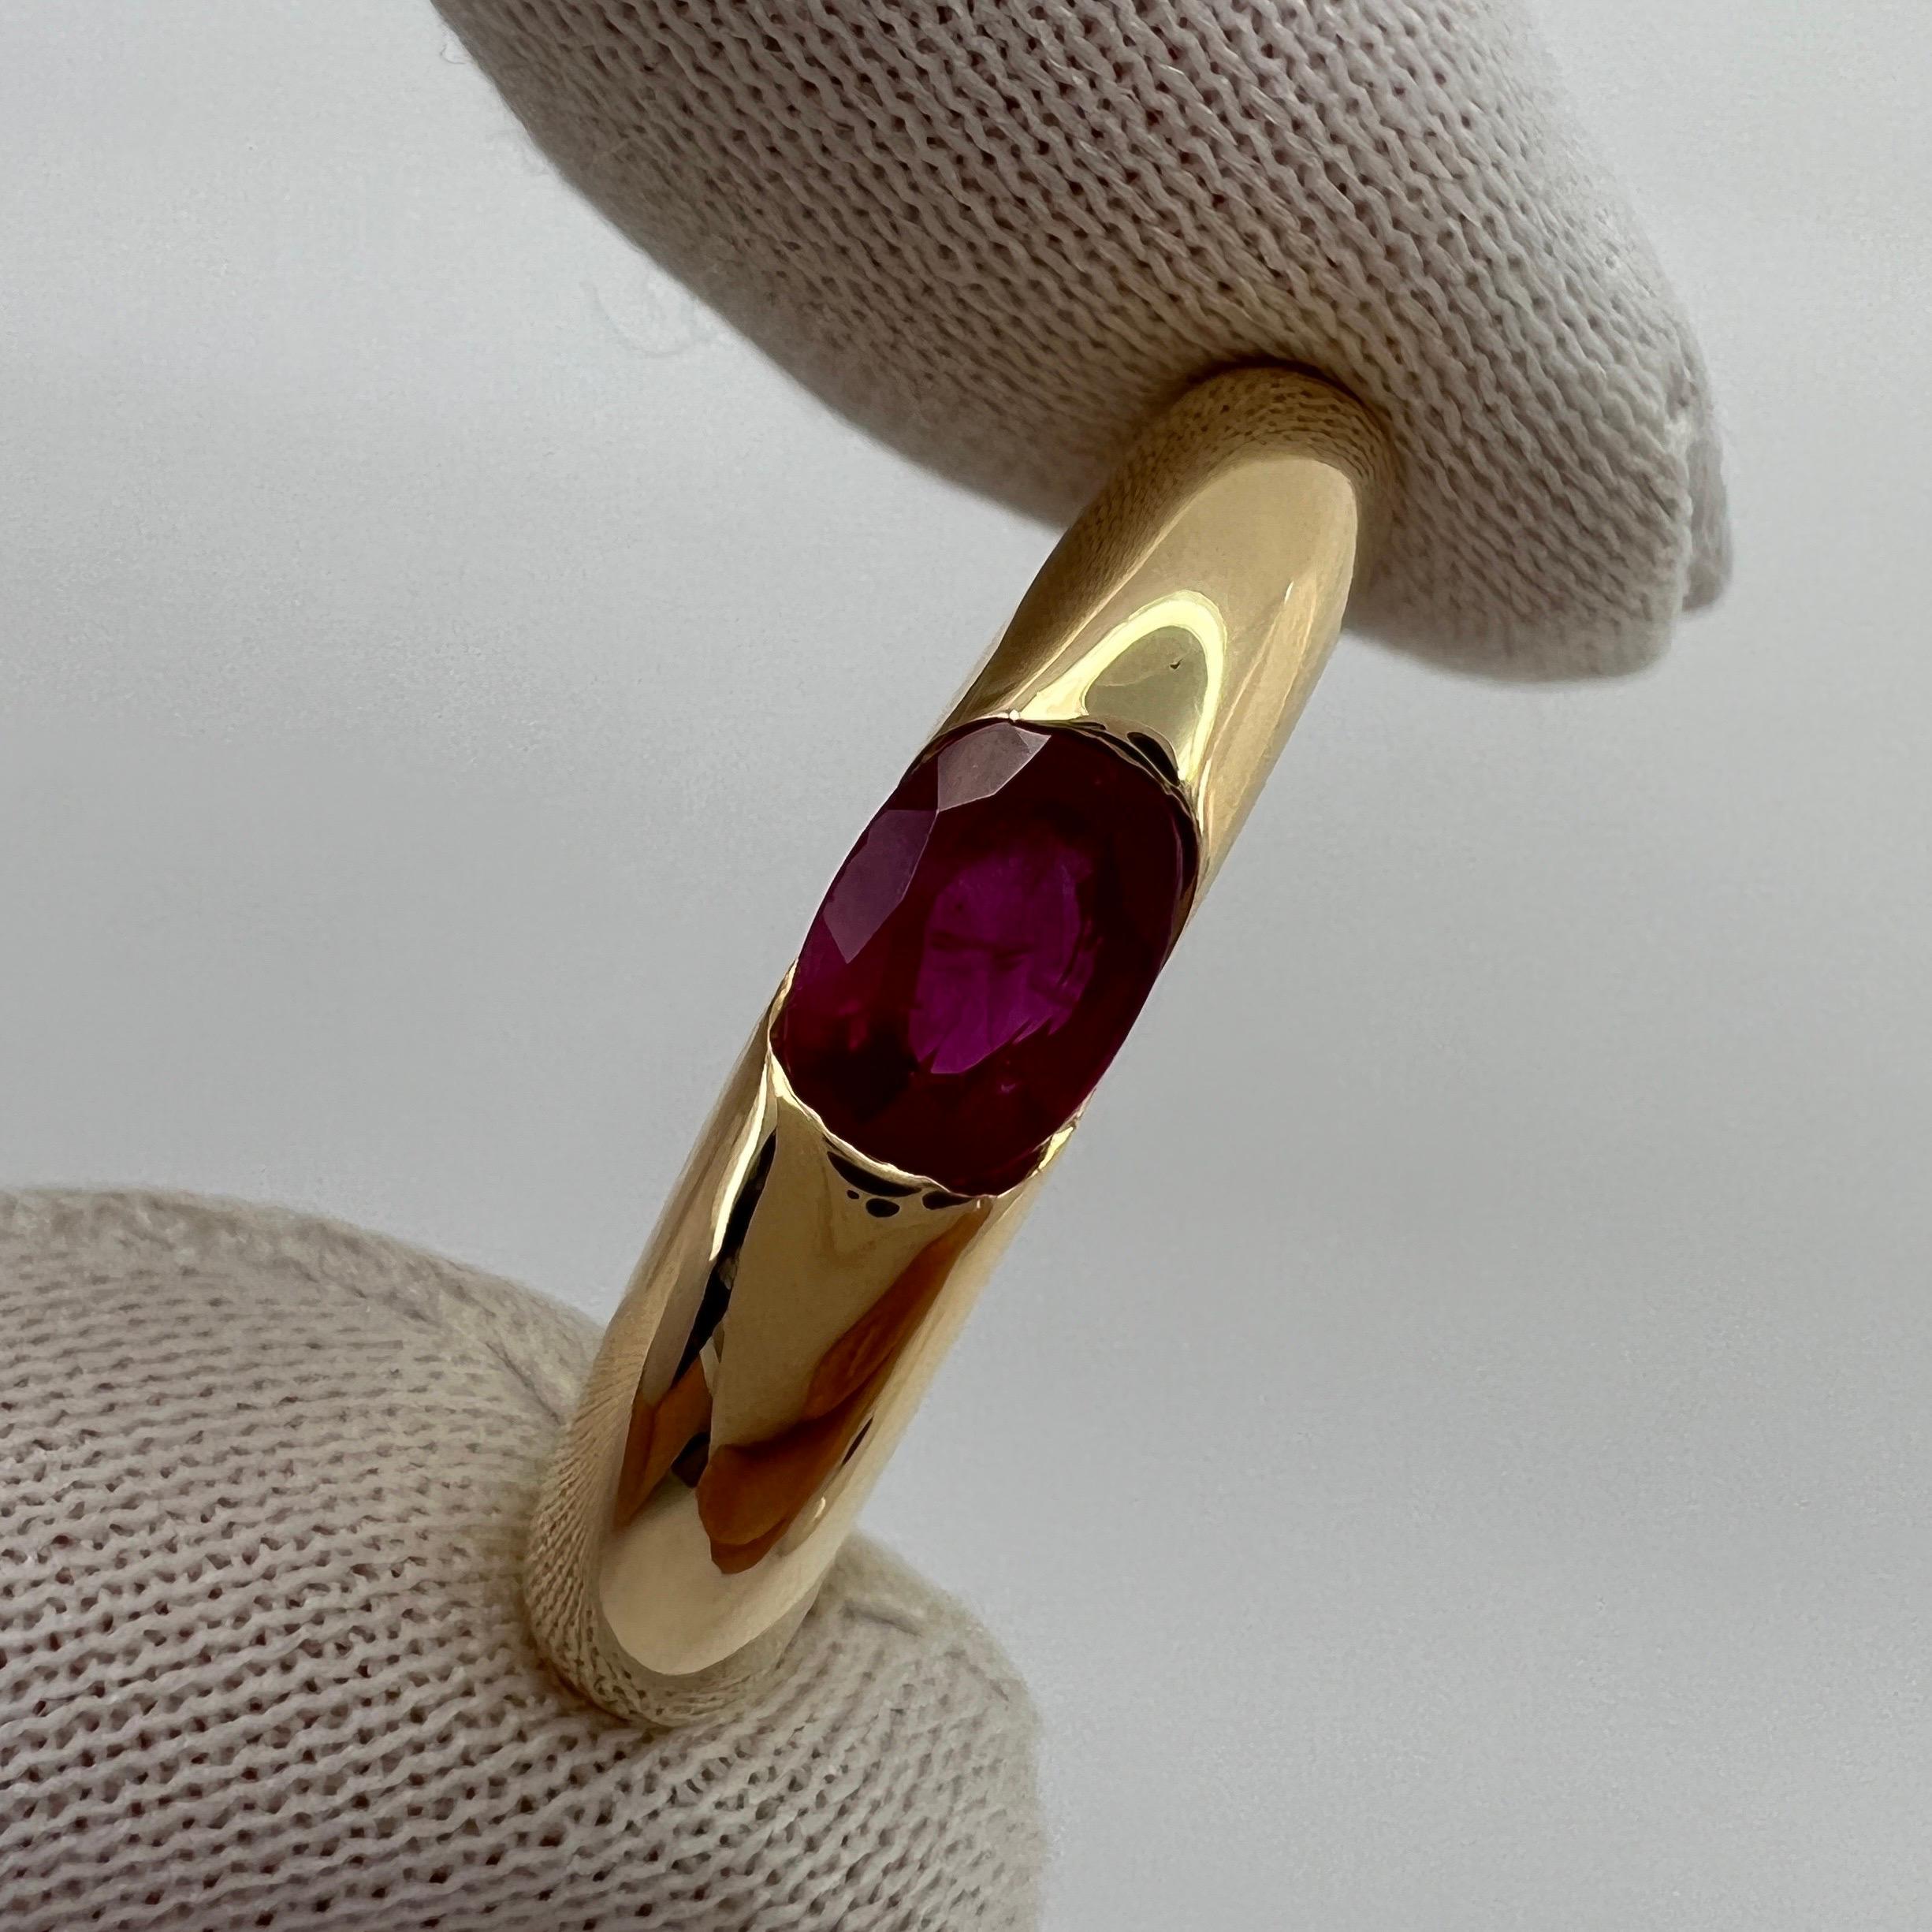 Vintage Cartier Deep Red Ruby Ellipse 18k Yellow Gold Oval Cut Solitaire Ring 7